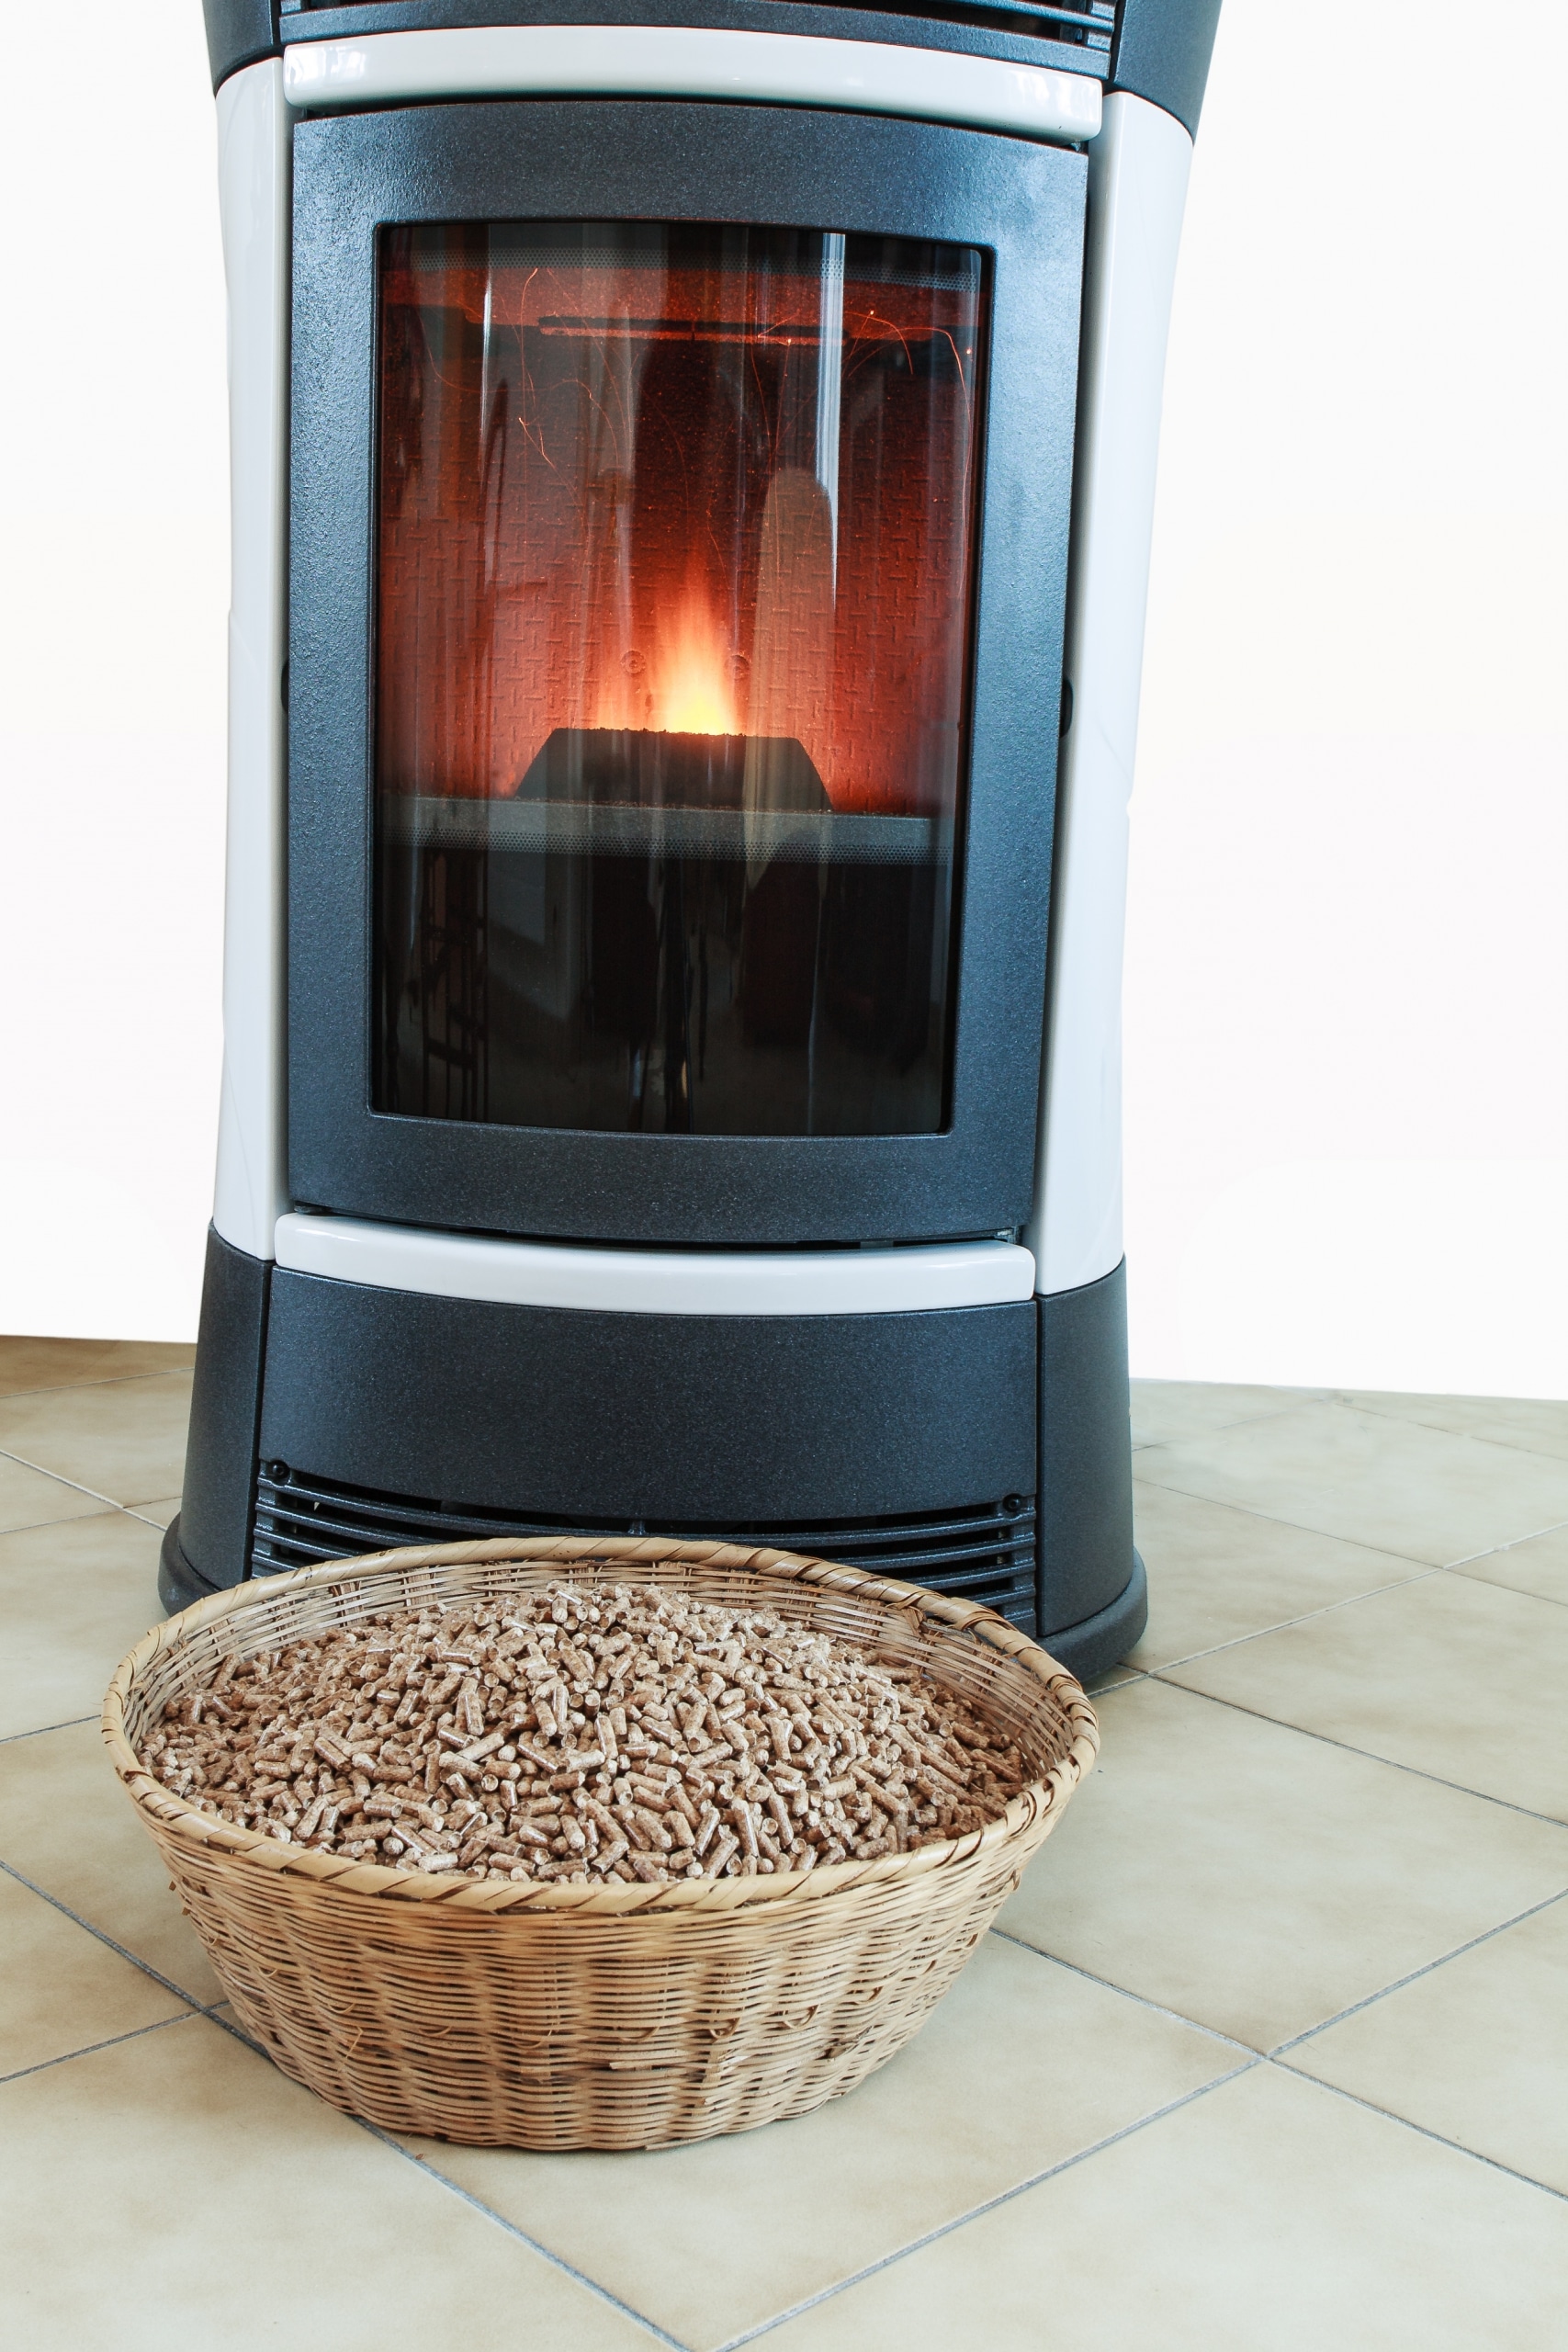 Wood Pellets Prices And Stoves For Home Balcas Energy